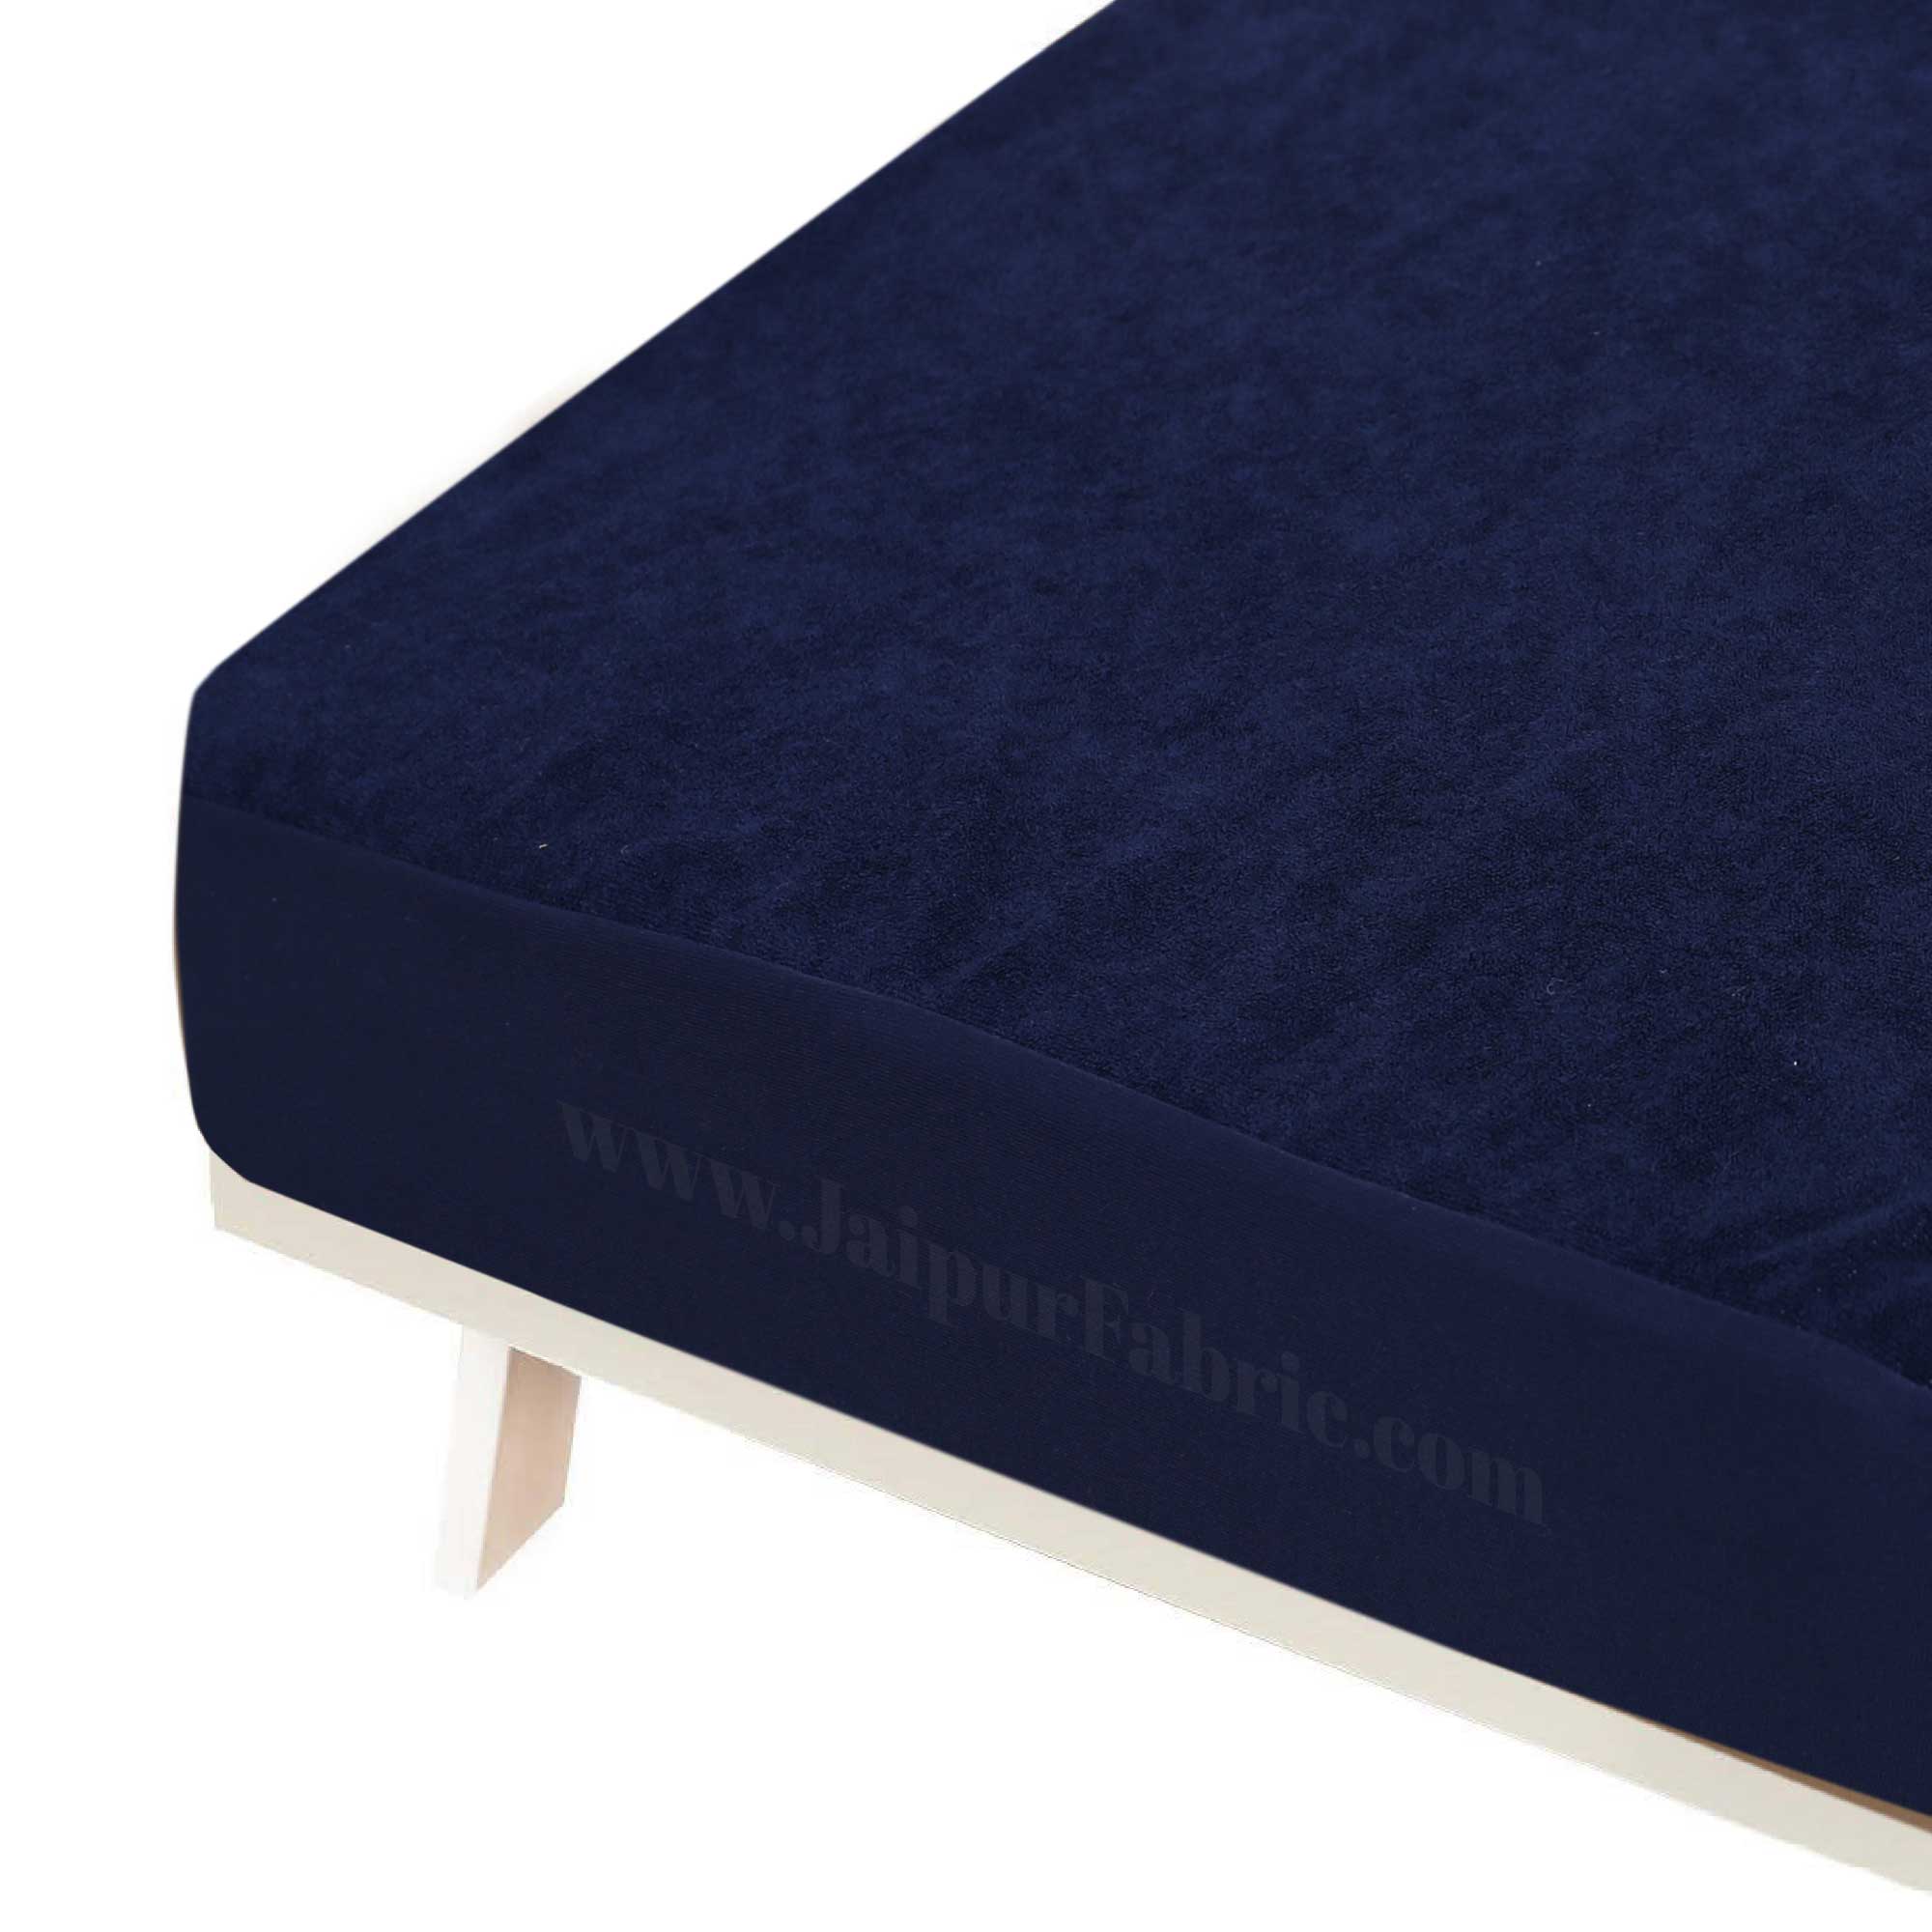 Heavy Quality Navy Blue Terry Cotton Waterproof and Elastic Fitted Through Out Double Mattress Protector